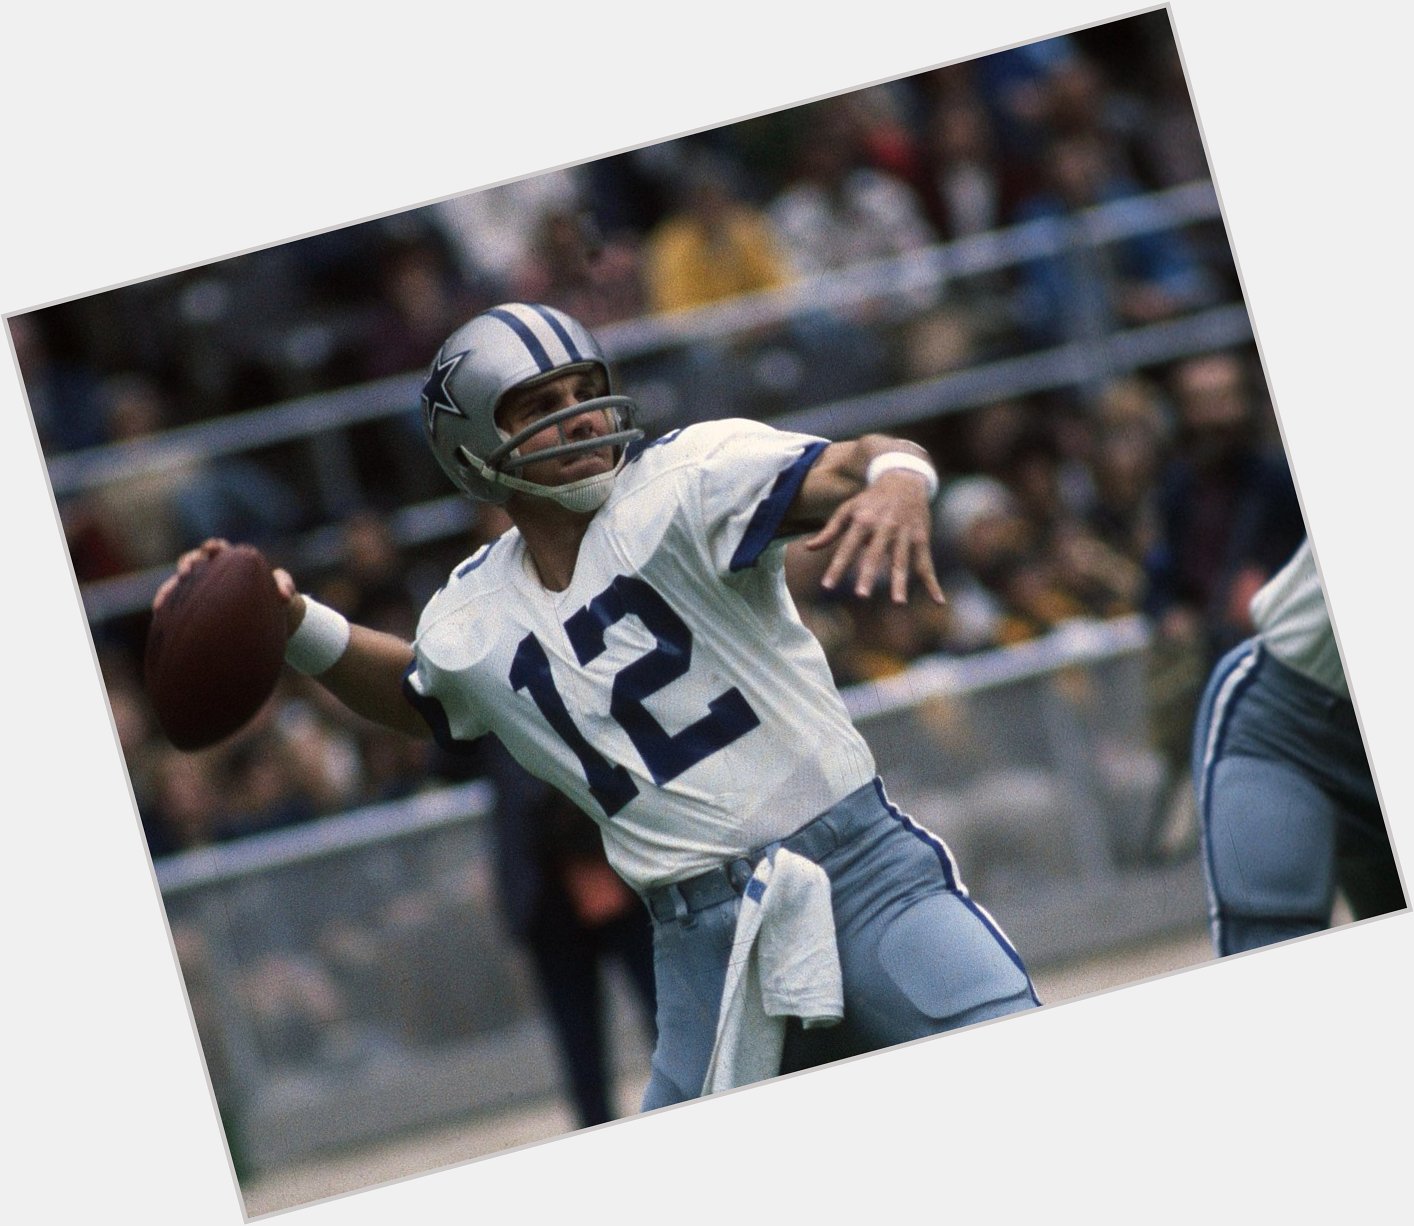 Happy birthday to one of the greatest QBs ever: Heisman Trophy & 2x Super Bowl winner Roger Staubach! 